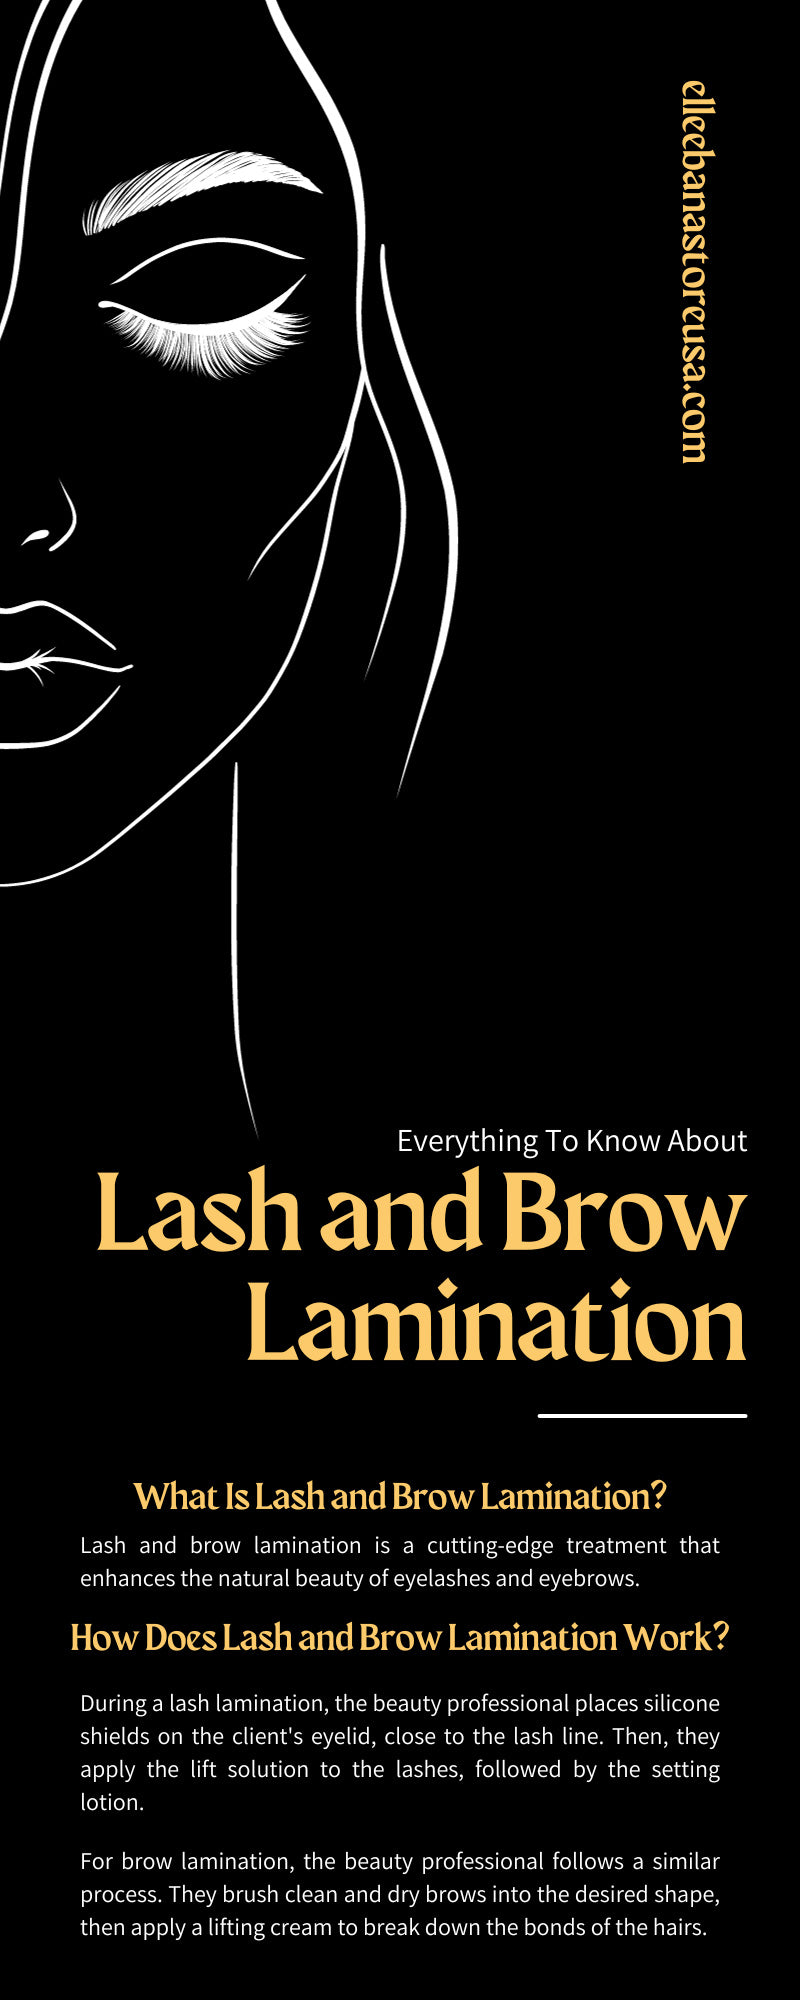 Everything To Know About Lash and Brow Lamination